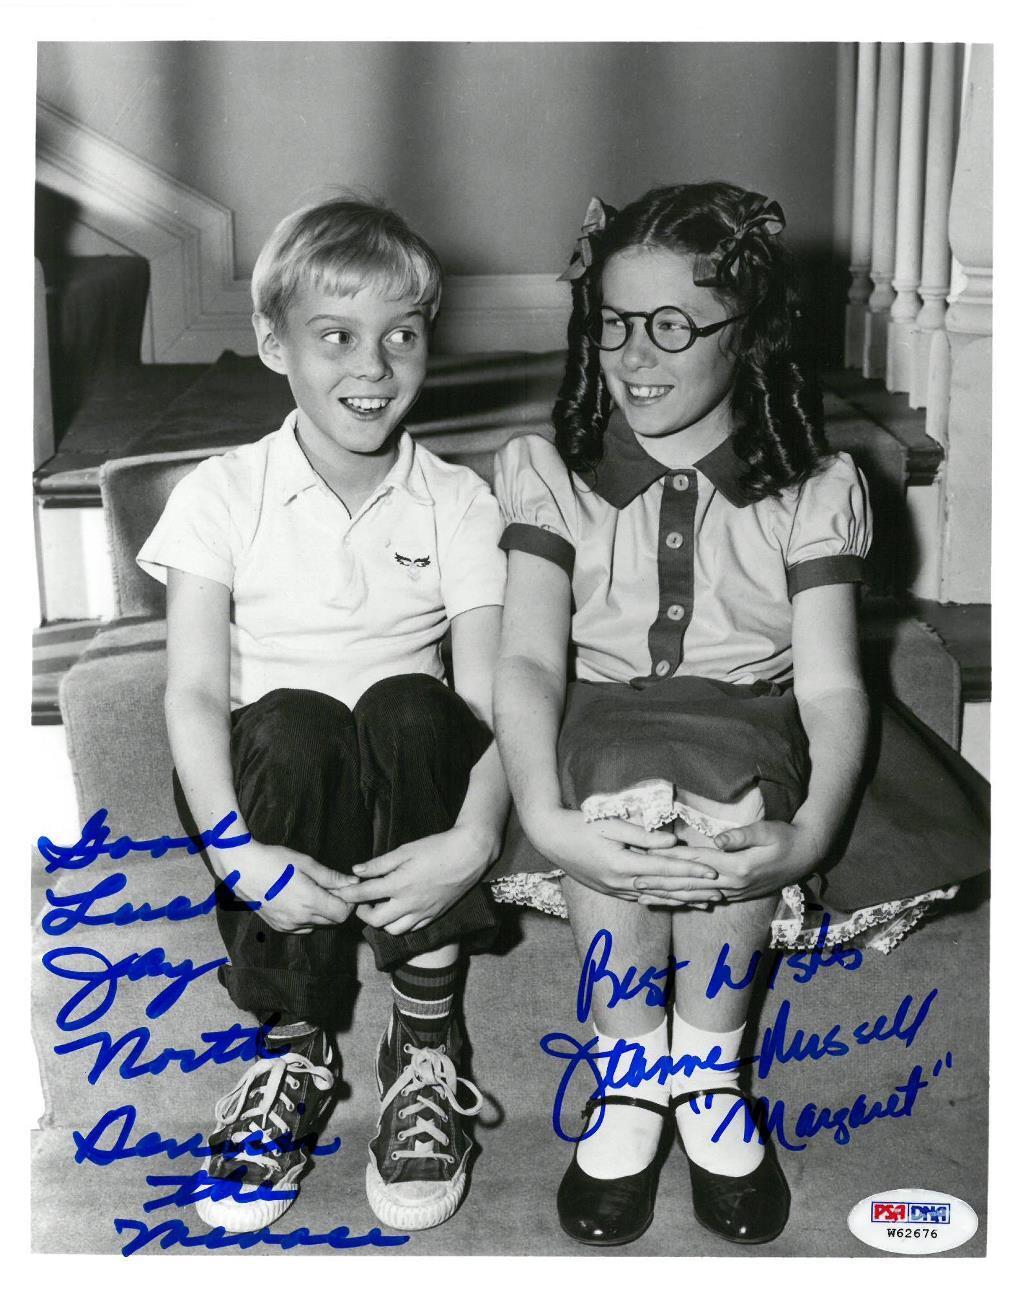 Jay North/JeannieRussell Signed Dennis the Menace Auto 8x10 Photo Poster painting PSA/DNA#W62676